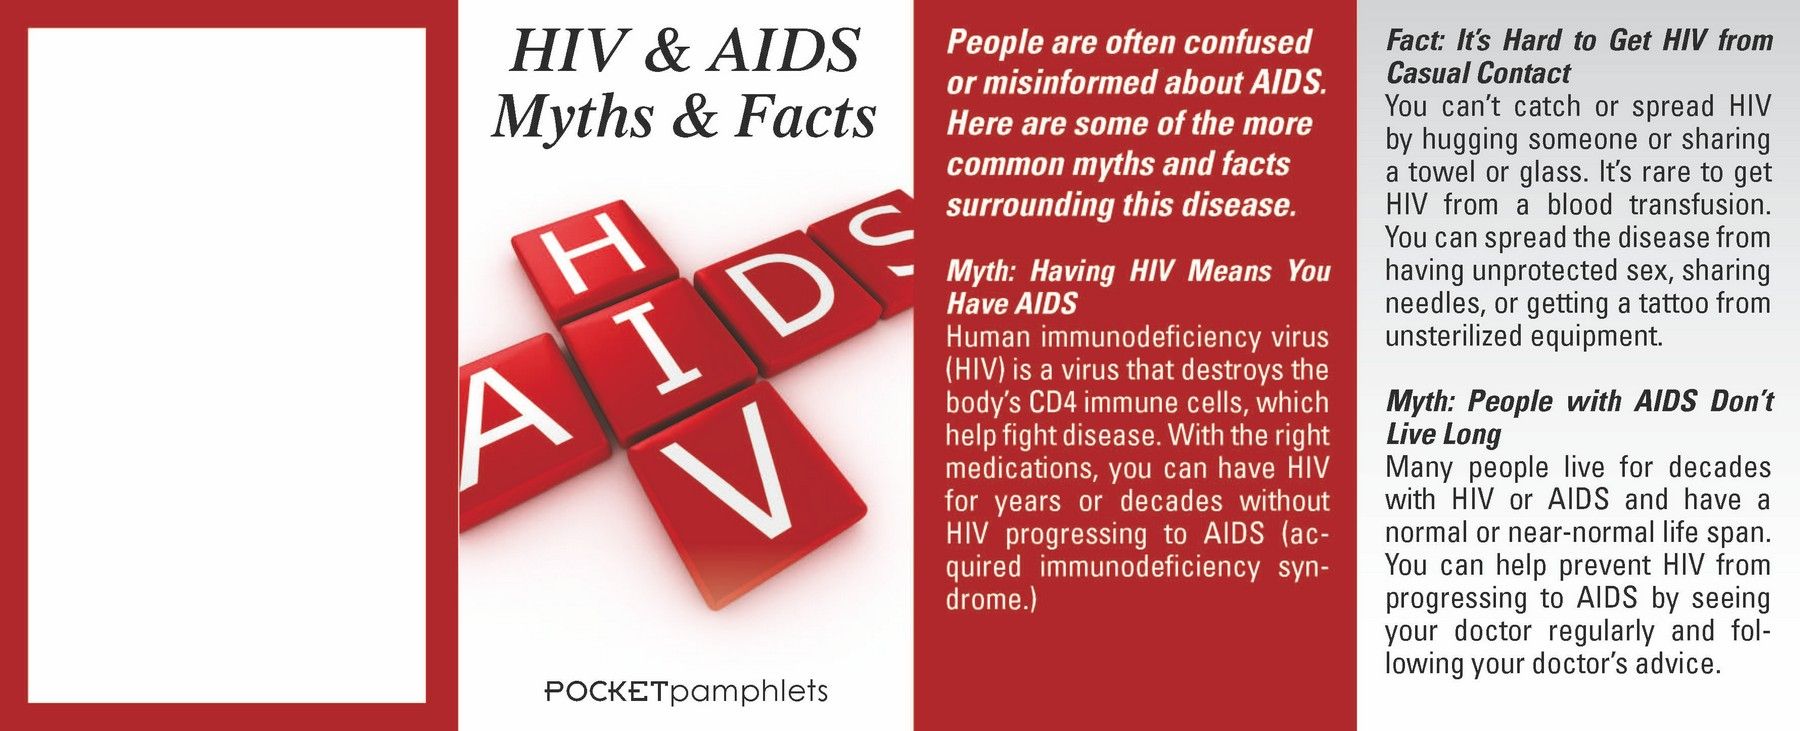 Этажи спид ап. About AIDS. HIV AIDS. Myths about HIV and AIDS. Pamphlet for HIV.